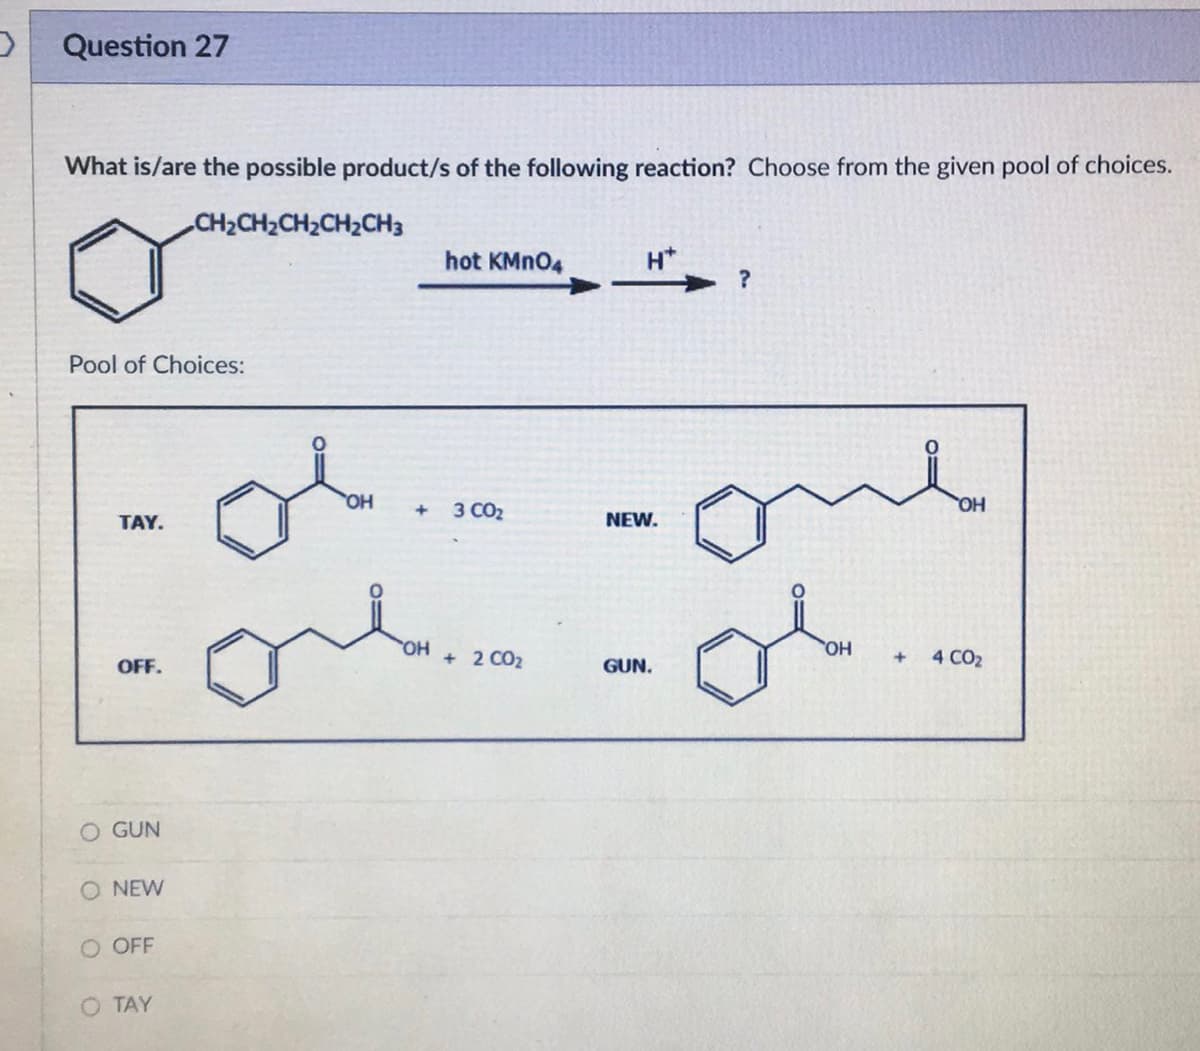 Question 27
What is/are the possible product/s of the following reaction? Choose from the given pool of choices.
•CH,CH,CH,CH,CH3
Pool of Choices:
TAY.
OFF.
GUN
O NEW
O OFF
O TAY
OH
hot KMnO4
+ 3 CO₂
la.com
OH
2
H*
NEW.
GUN.
?
one
OH
+
OH
4 CO₂